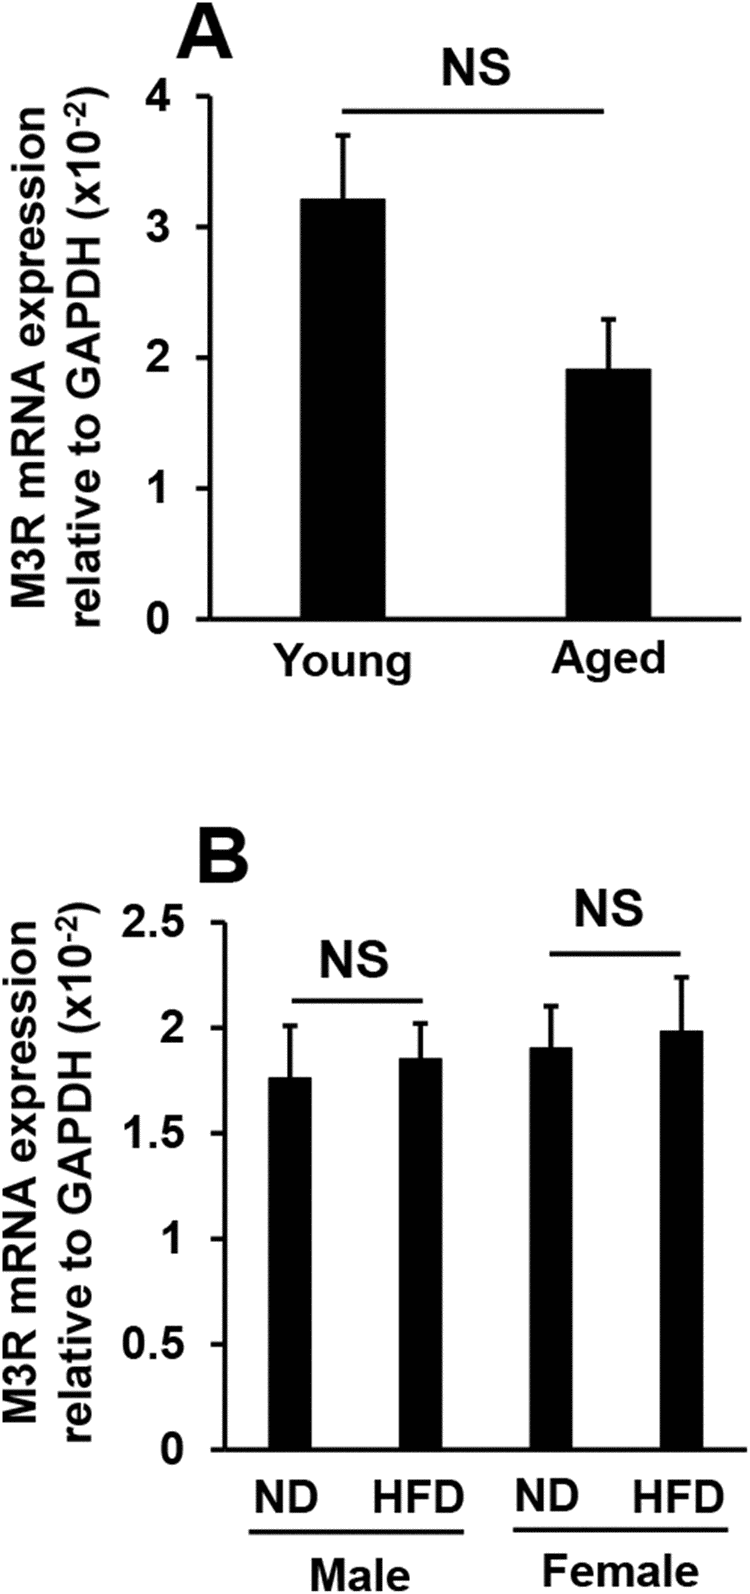 Effects of aging or high-fat diet feeding on M3R mRNA expression in lacrimal glands. M3R mRNA expression levels in young and aged mice (N=7-8) (A), and in mice fed a normal diet (ND) or high-fat diet (HFD) for 8 weeks (N=4-5) (B). Values are presented as means ± SEM. NS, not significant (an unpaired Student’s t-test).